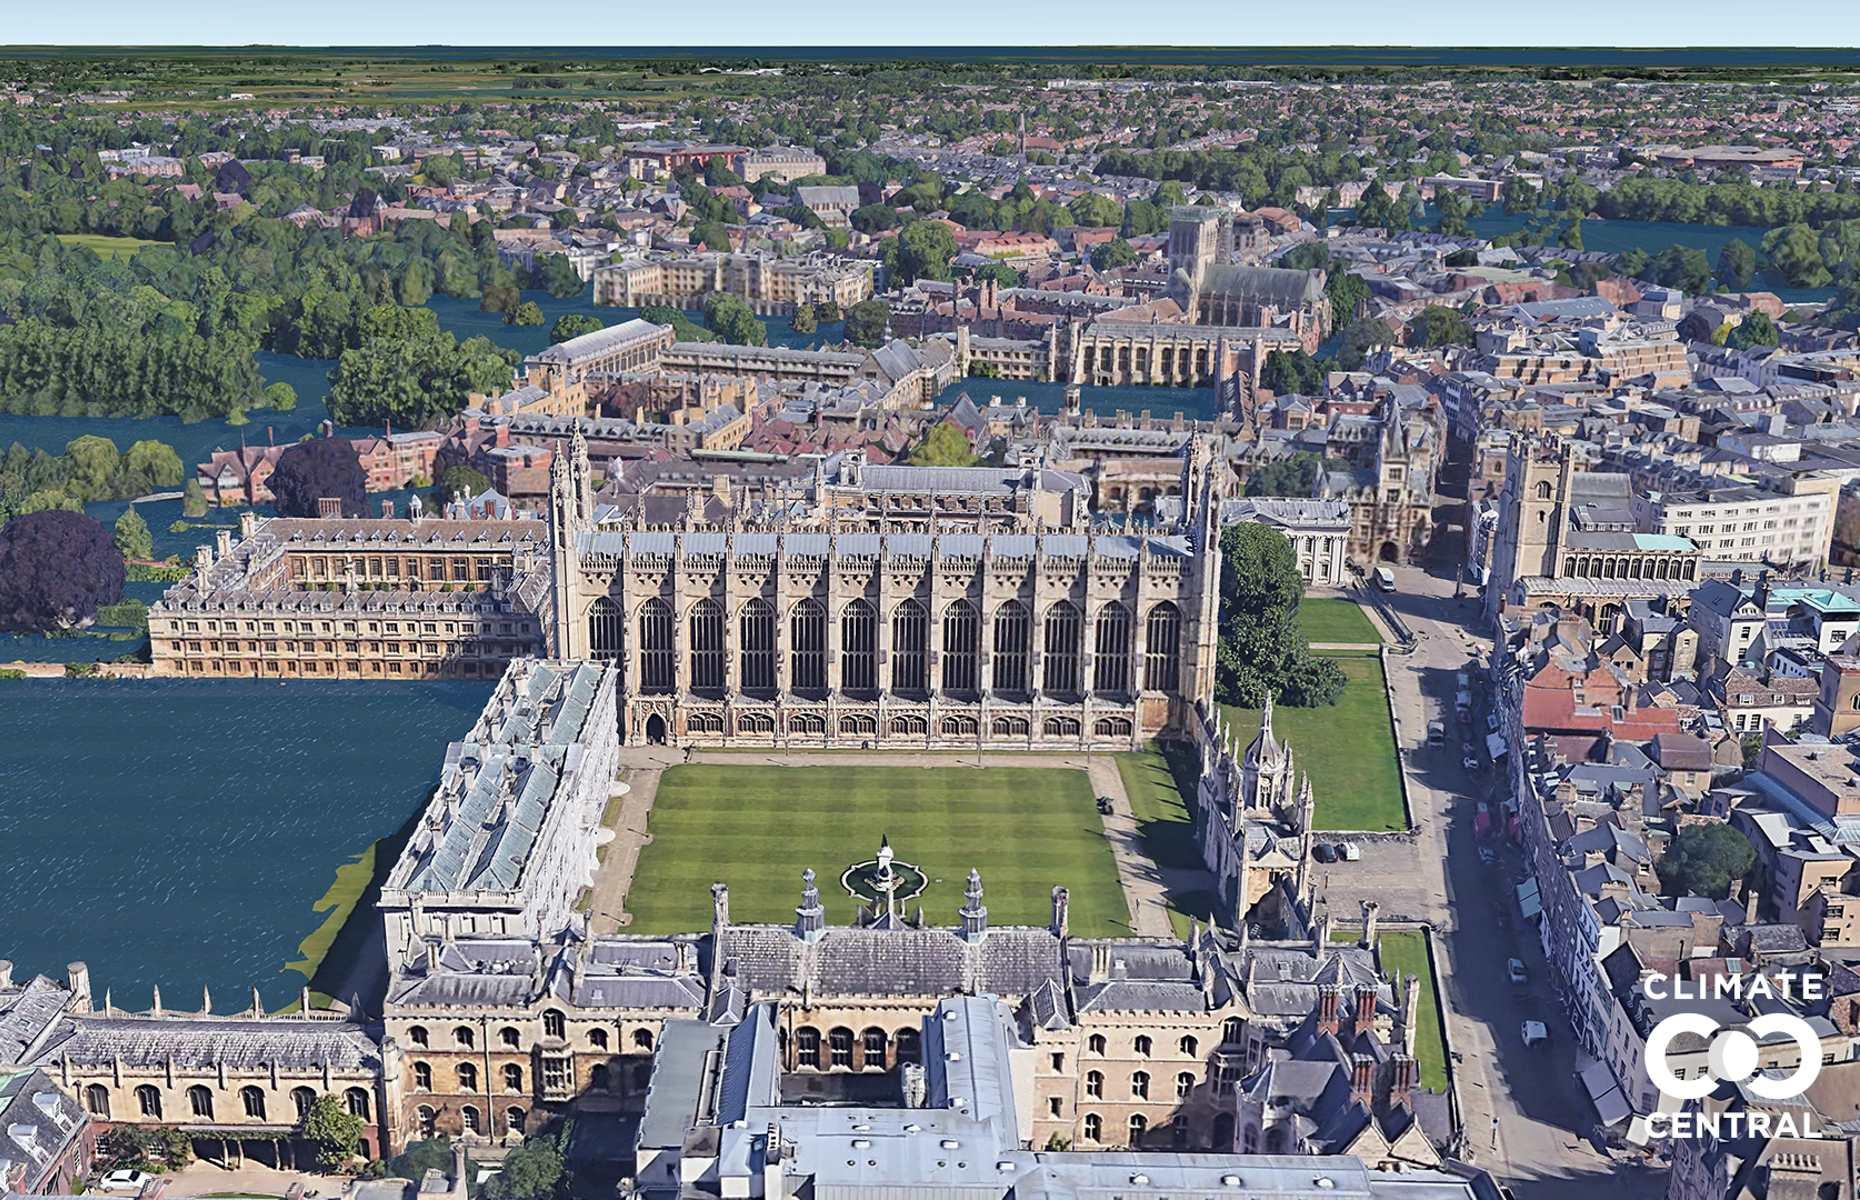 Thanks to its proximity to the River Cam, the historic city of Cambridge in southeastern England faces catastrophic destruction at the hands of climate change. In fact, even in the event of just 1.5°C (2.7°F) of warming (the minimum that will occur no matter what actions humanity takes to stop it), a significant chunk of England’s east coast would be gobbled up by the sea.